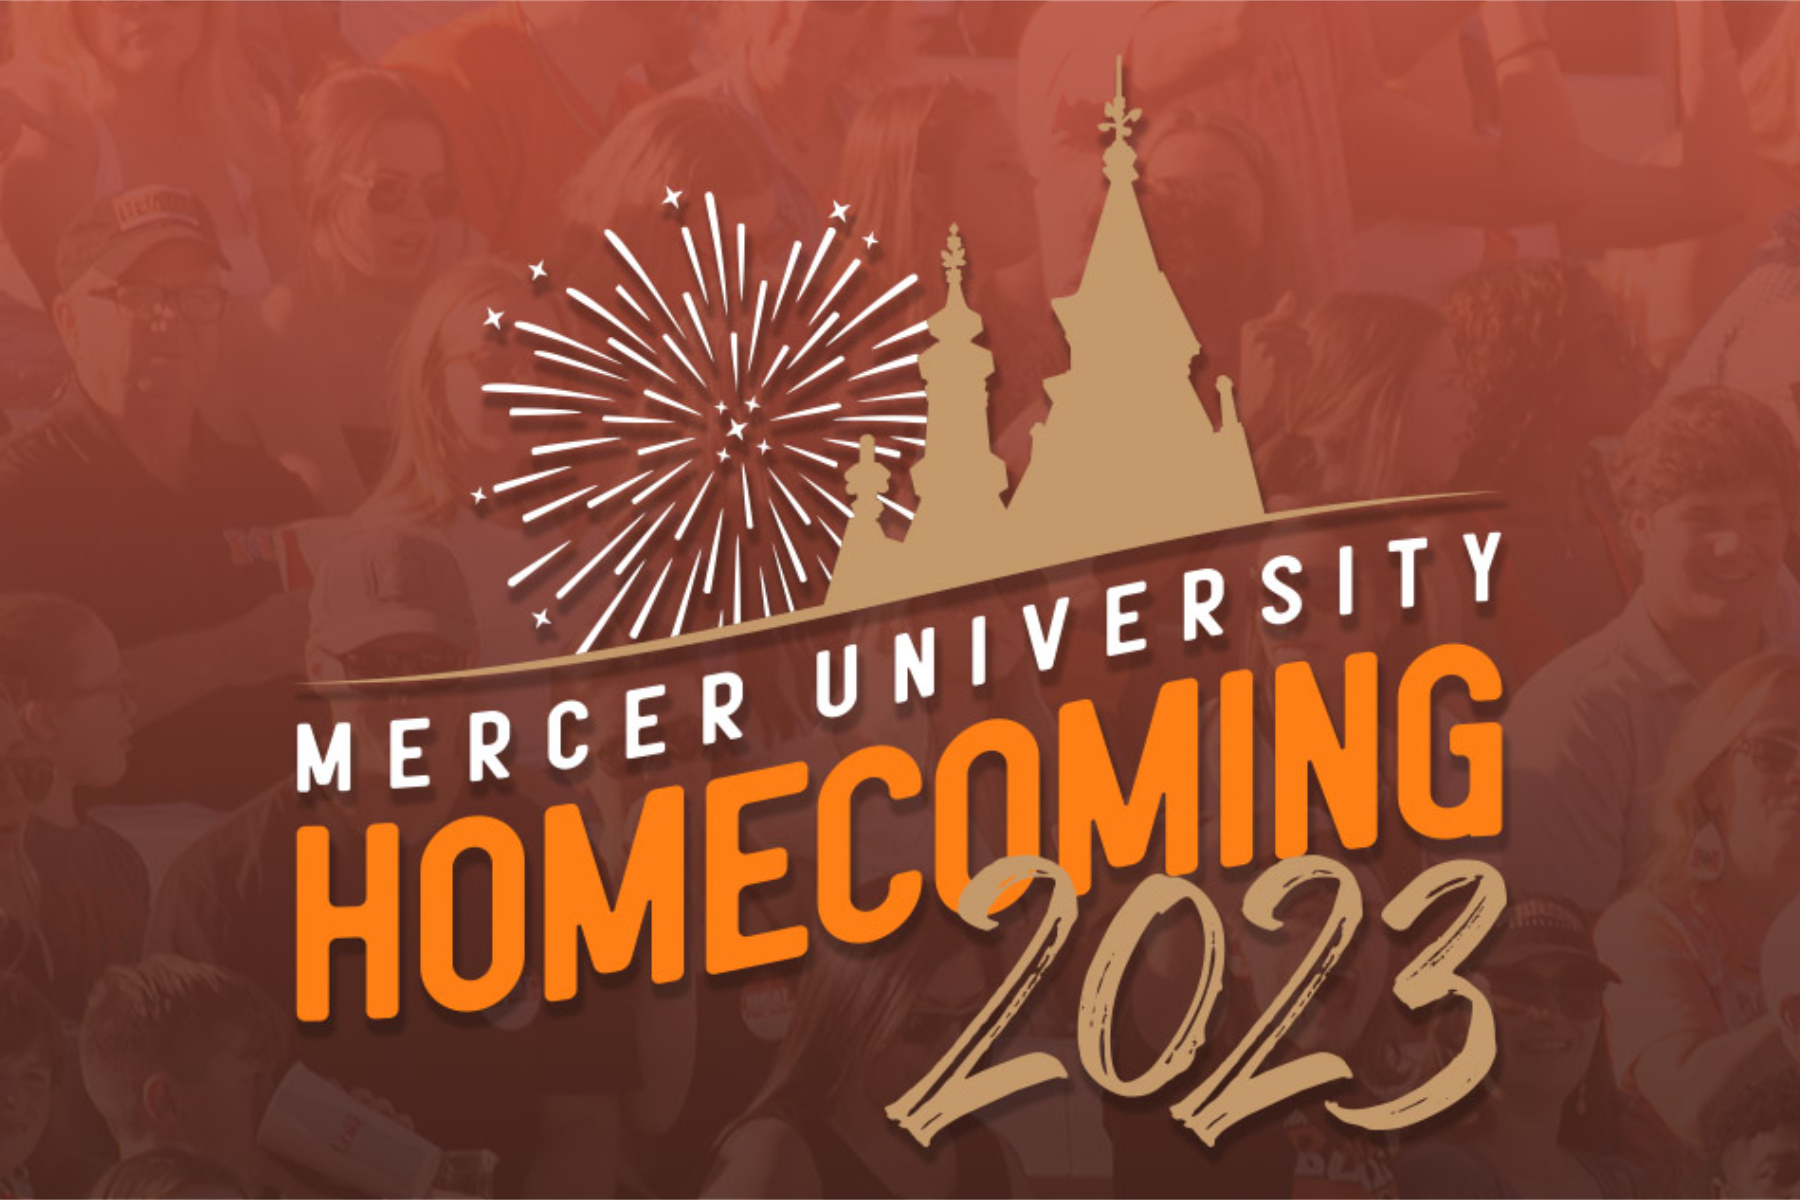 logo says mercer university homecoming 2023. fireworks and outline of administration building are in the background